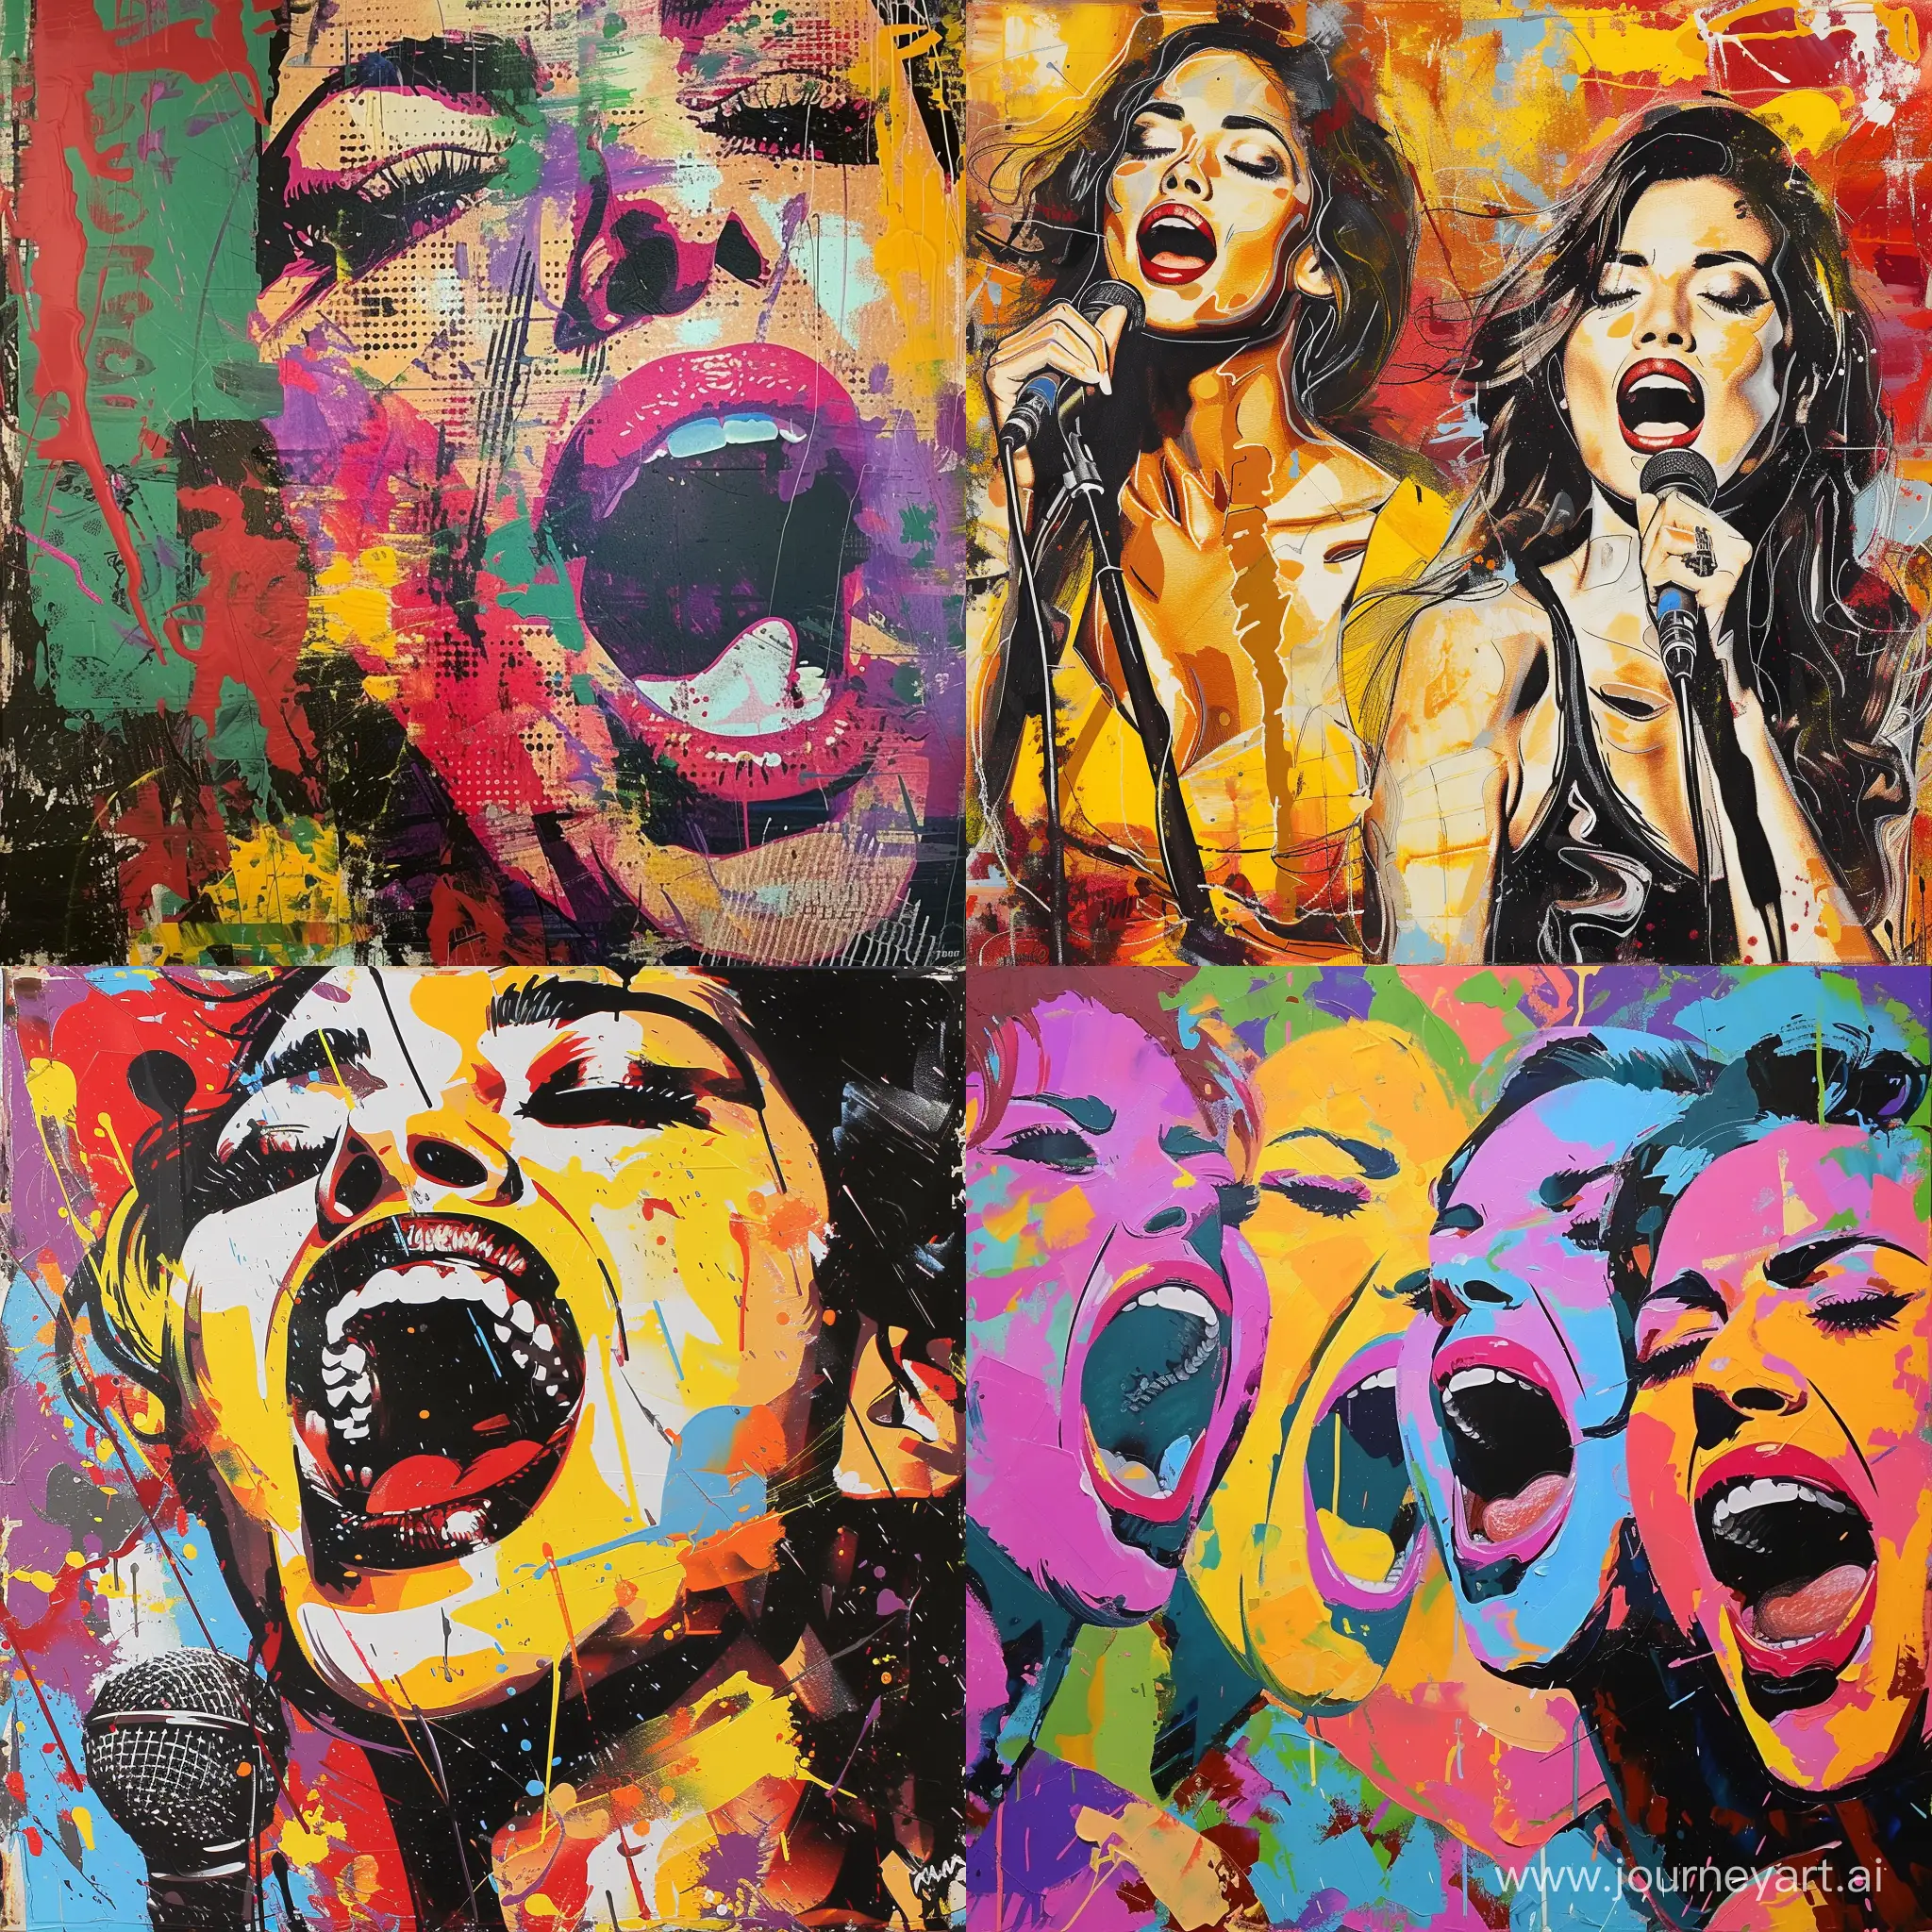 pop art painting in the style of mimmo rotella with theme: women and their creativity expressed in singing and sounds